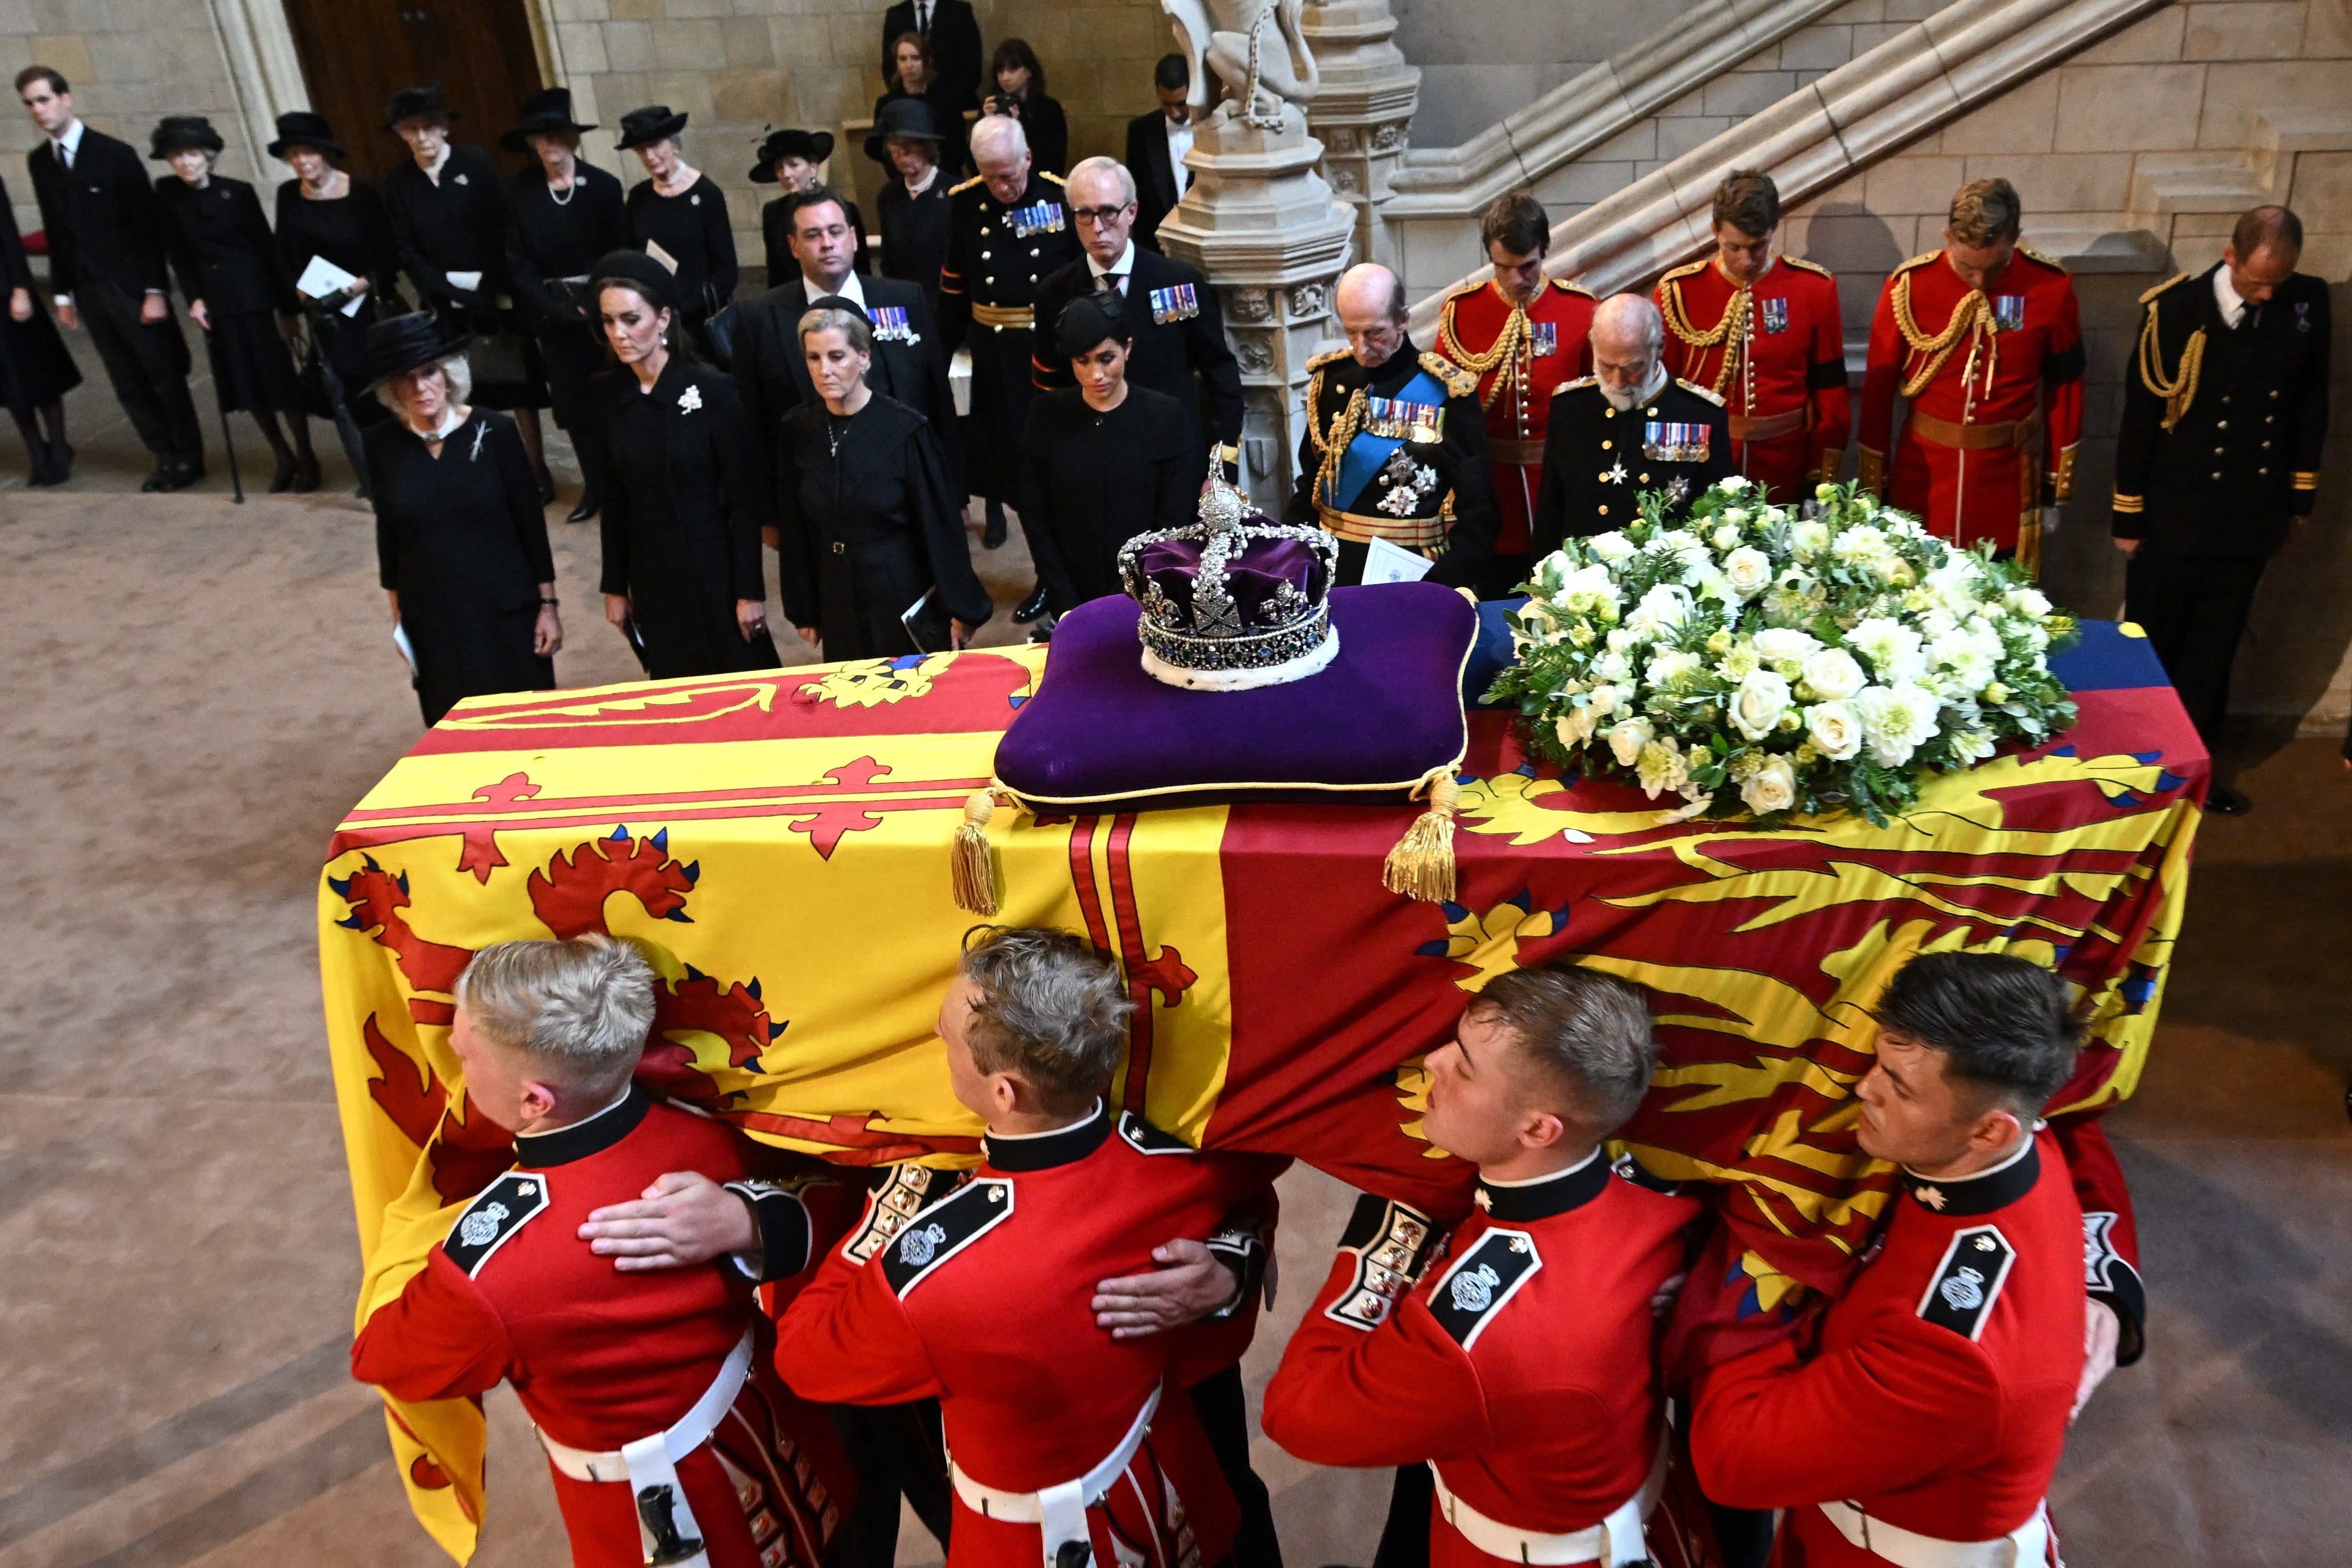 Pallbearers from The Queen's Company, 1st Battalion Grenadier Guards carry the coffin of Queen Elizabeth II